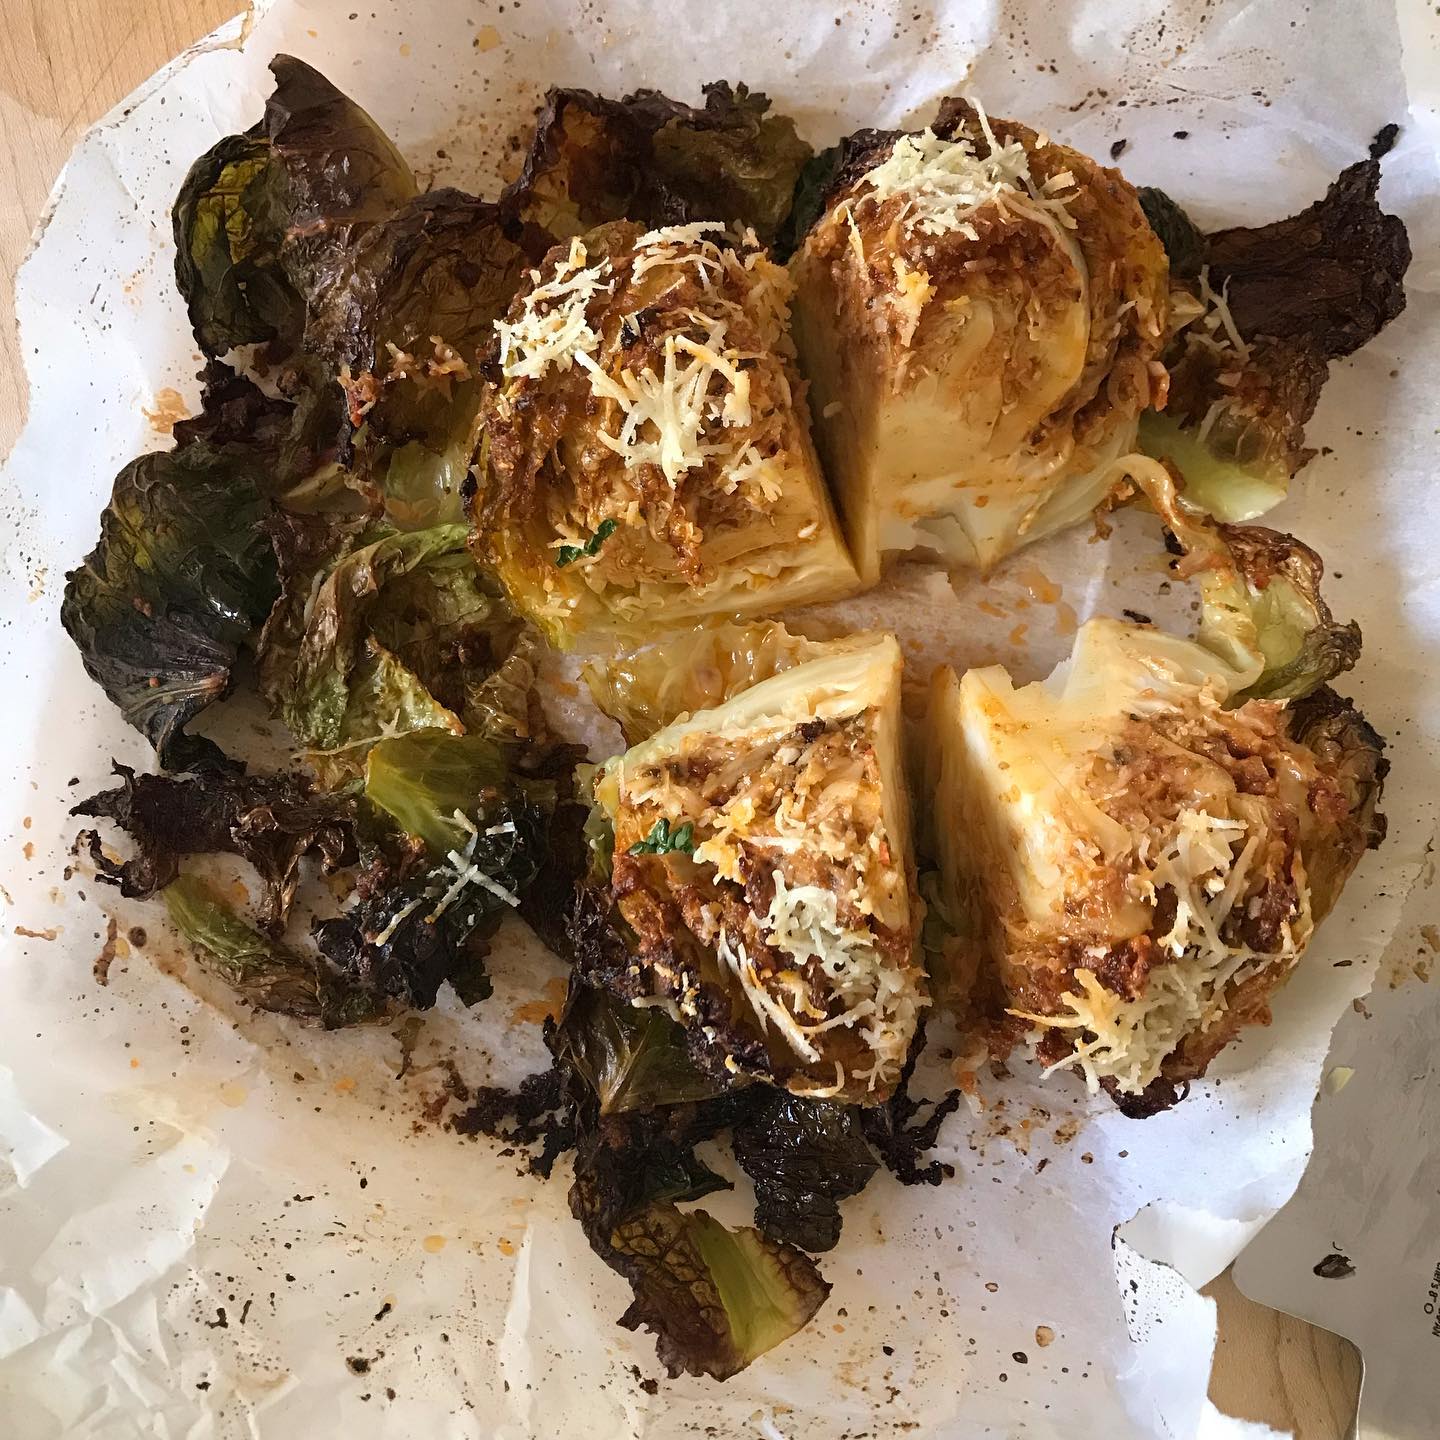 This is what Savoy cabbage looks like when it’s been steamed, rubbed with a garlicky paprika paste and roasted for 45 min. Inspired by a spectacular charred cabbage dish I loved at @barkismet in Halifax. 
.
.
#savoycabbage #roastedcabbage #cabbagerocks #thestarofthemeal #vegetablesrule